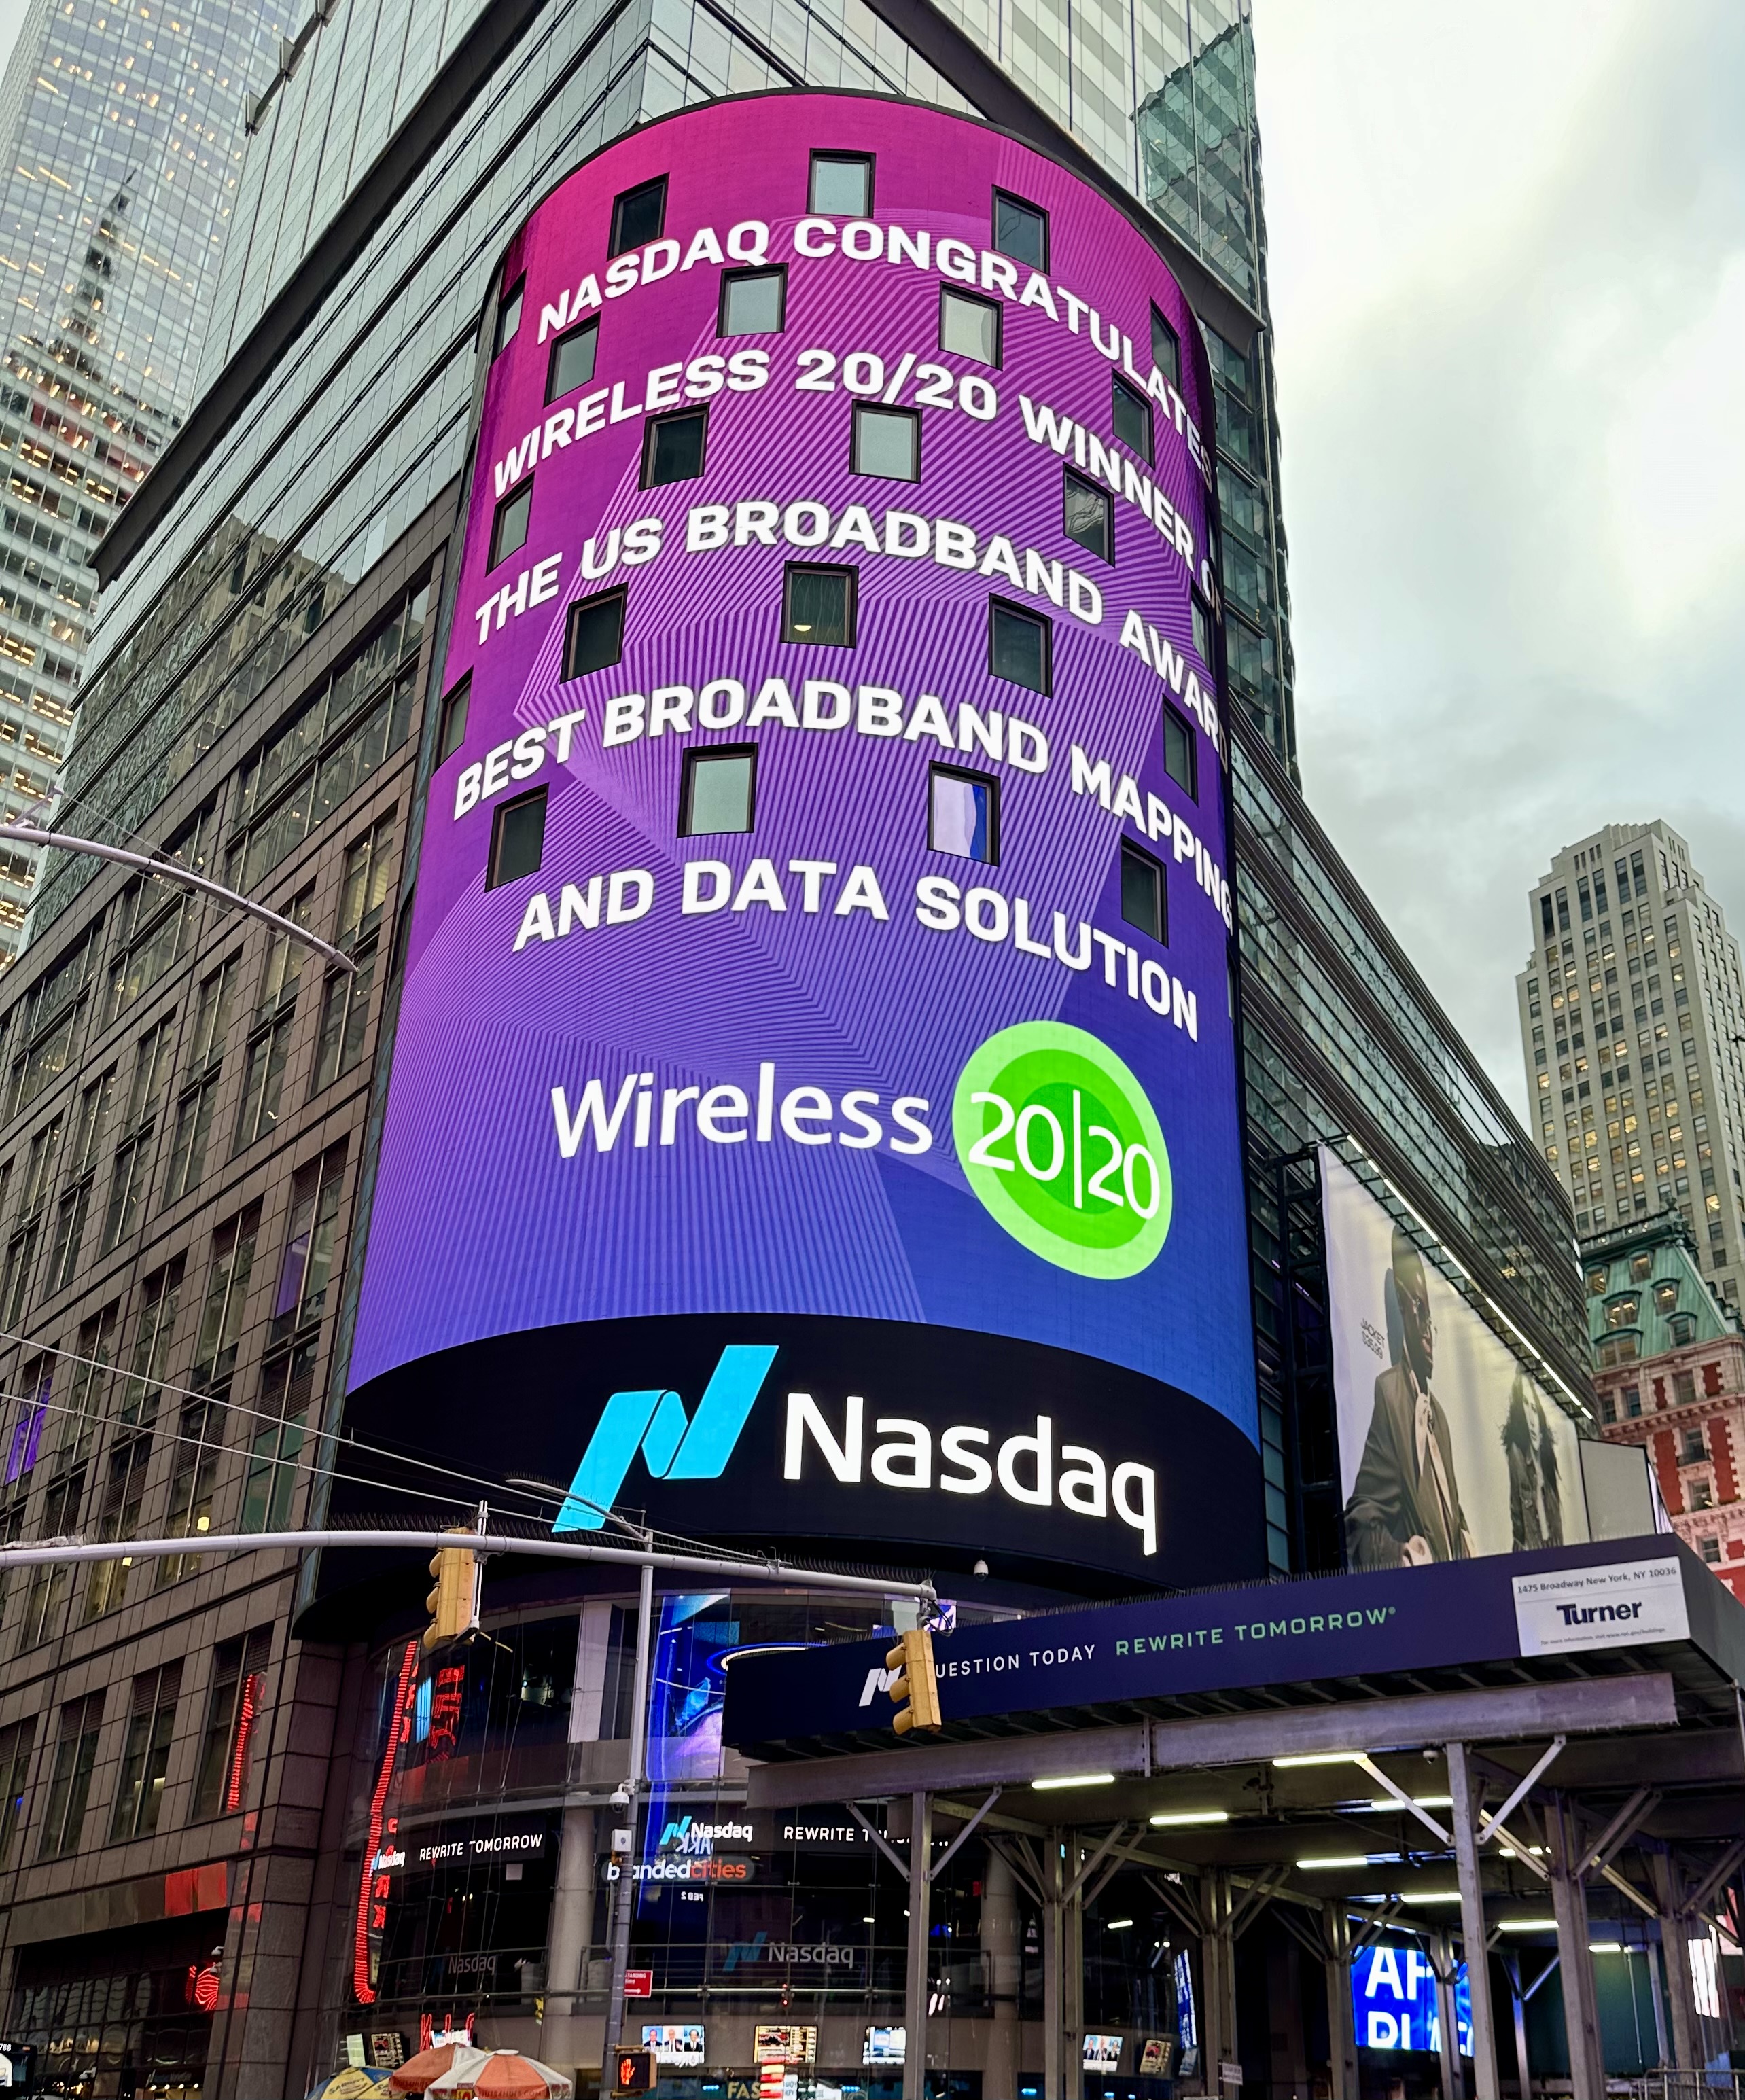 Congrats from NASDAQ! Award for Best Broadband Mapping and Database Solution